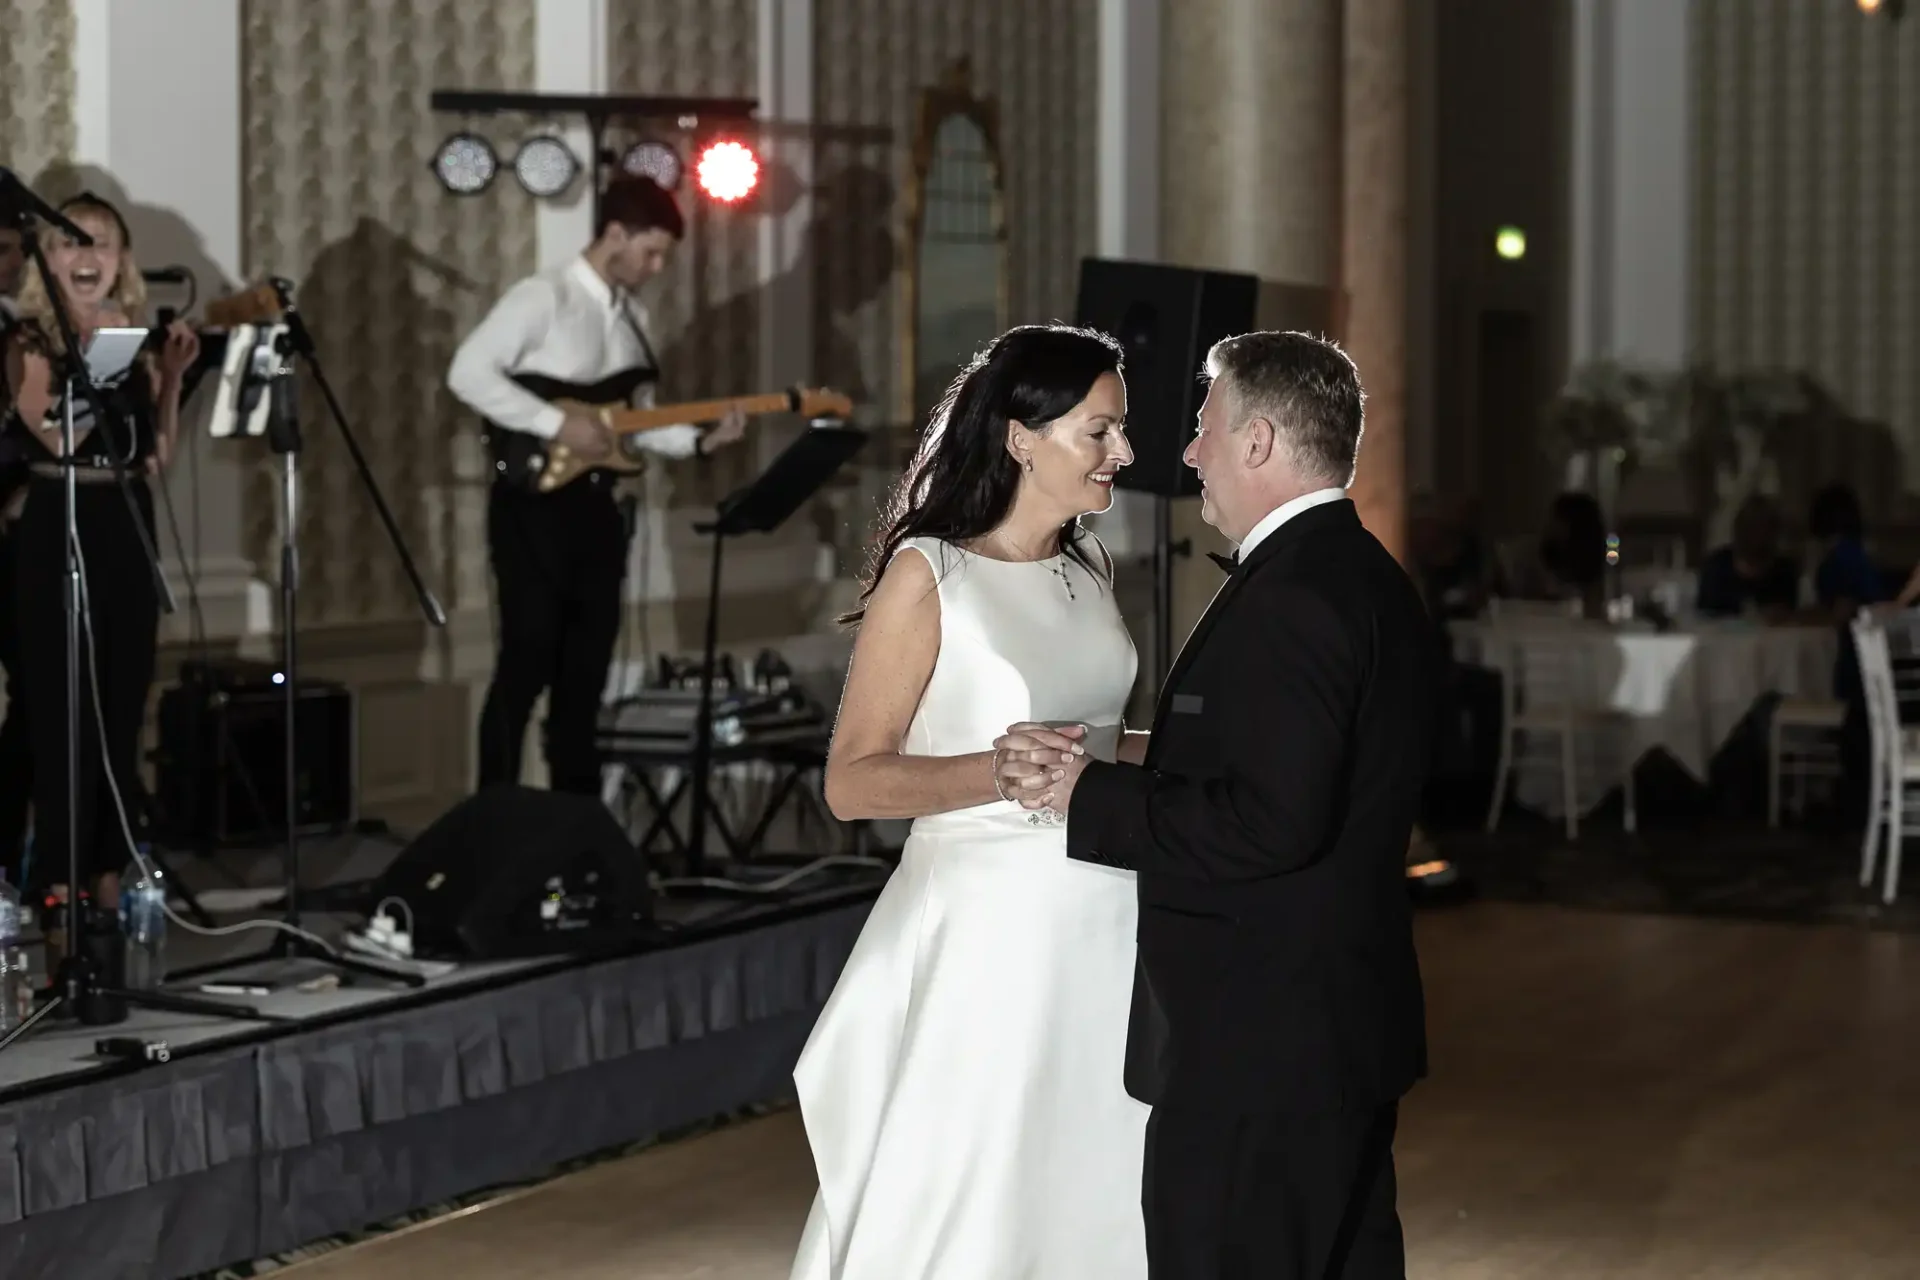 A couple dancing closely in a formal setting during a wedding reception, with a live band performing in the background.